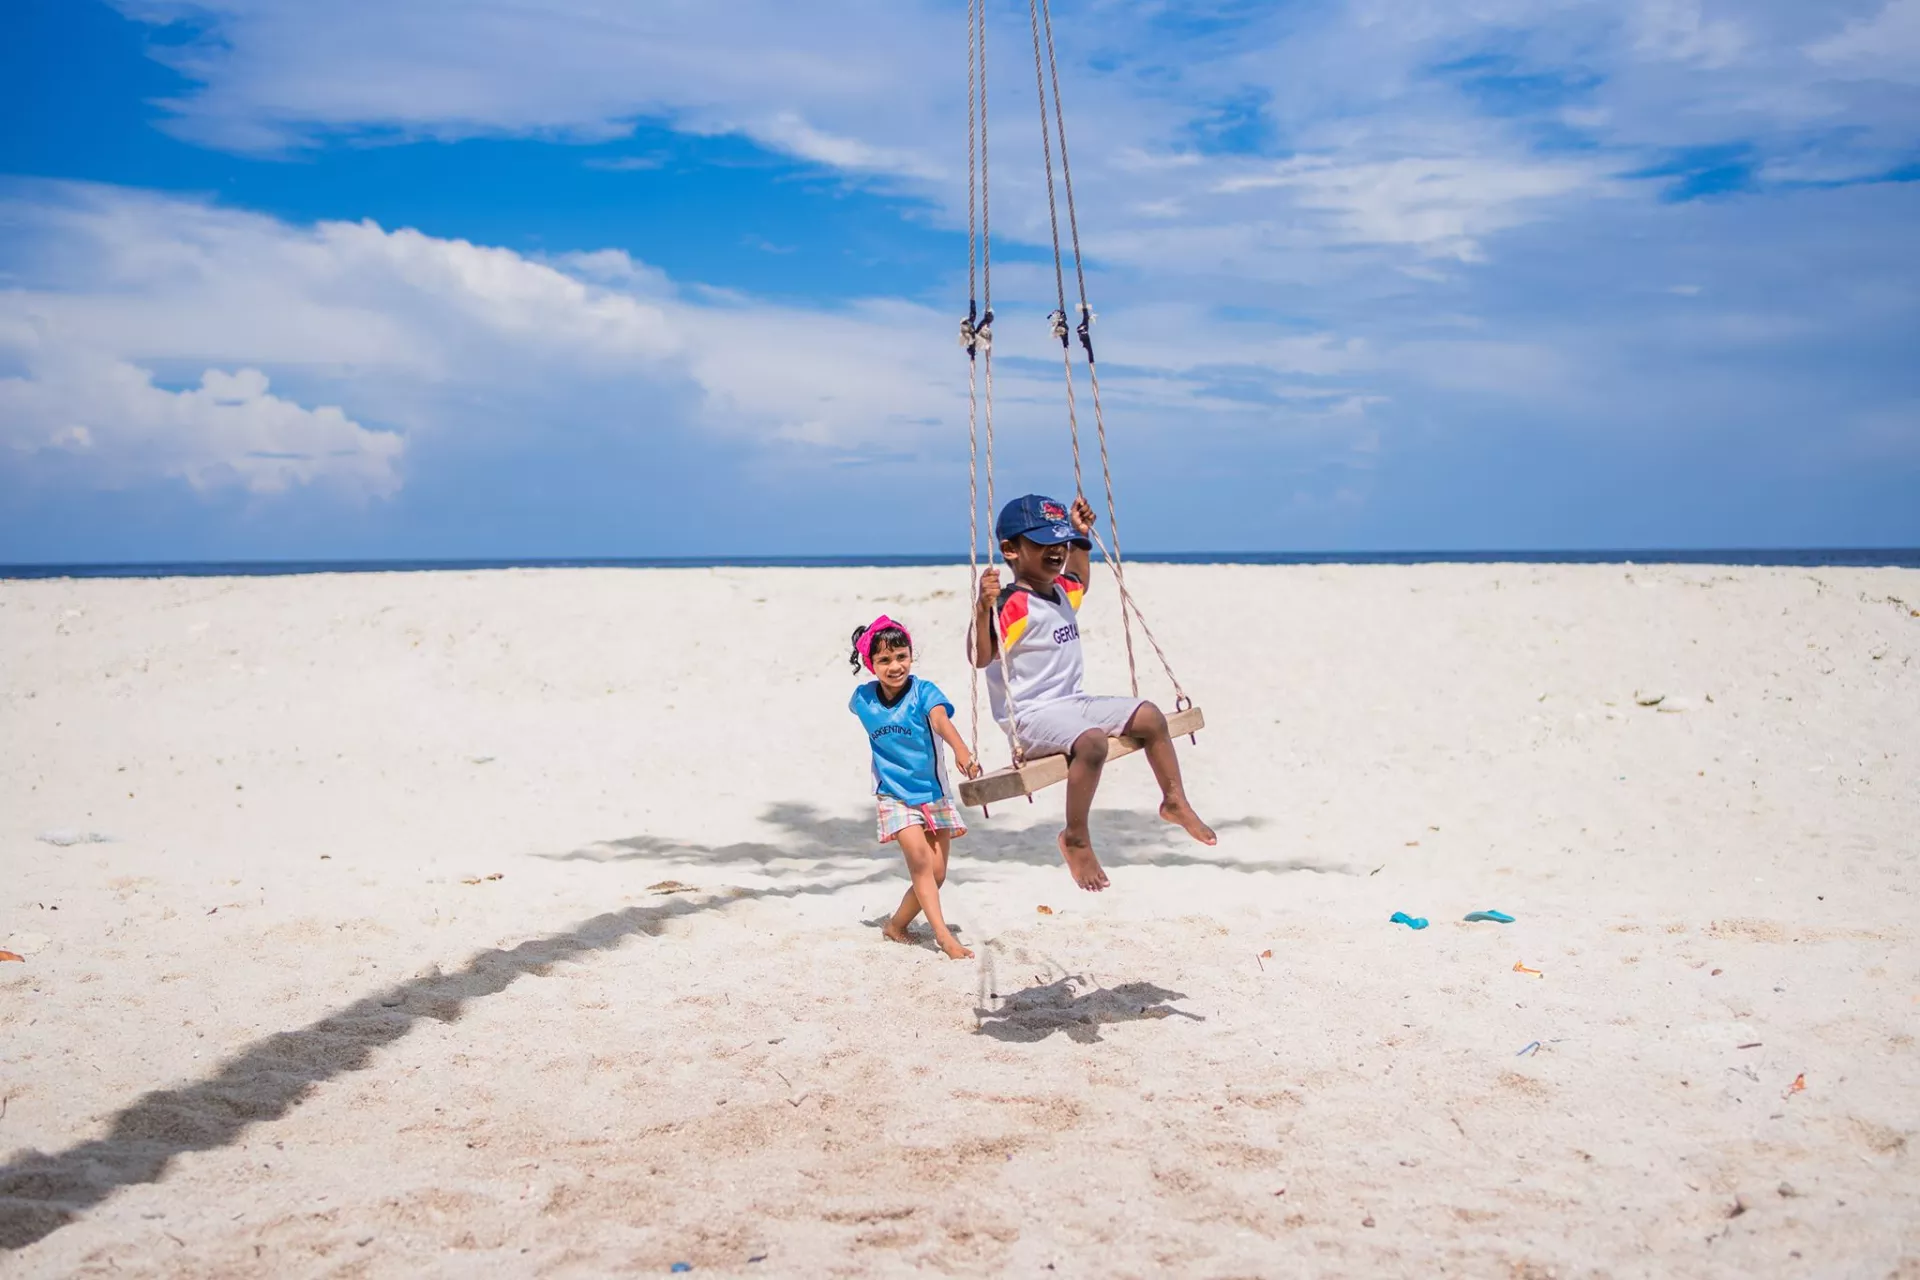 Two children play on a swing on the beach.